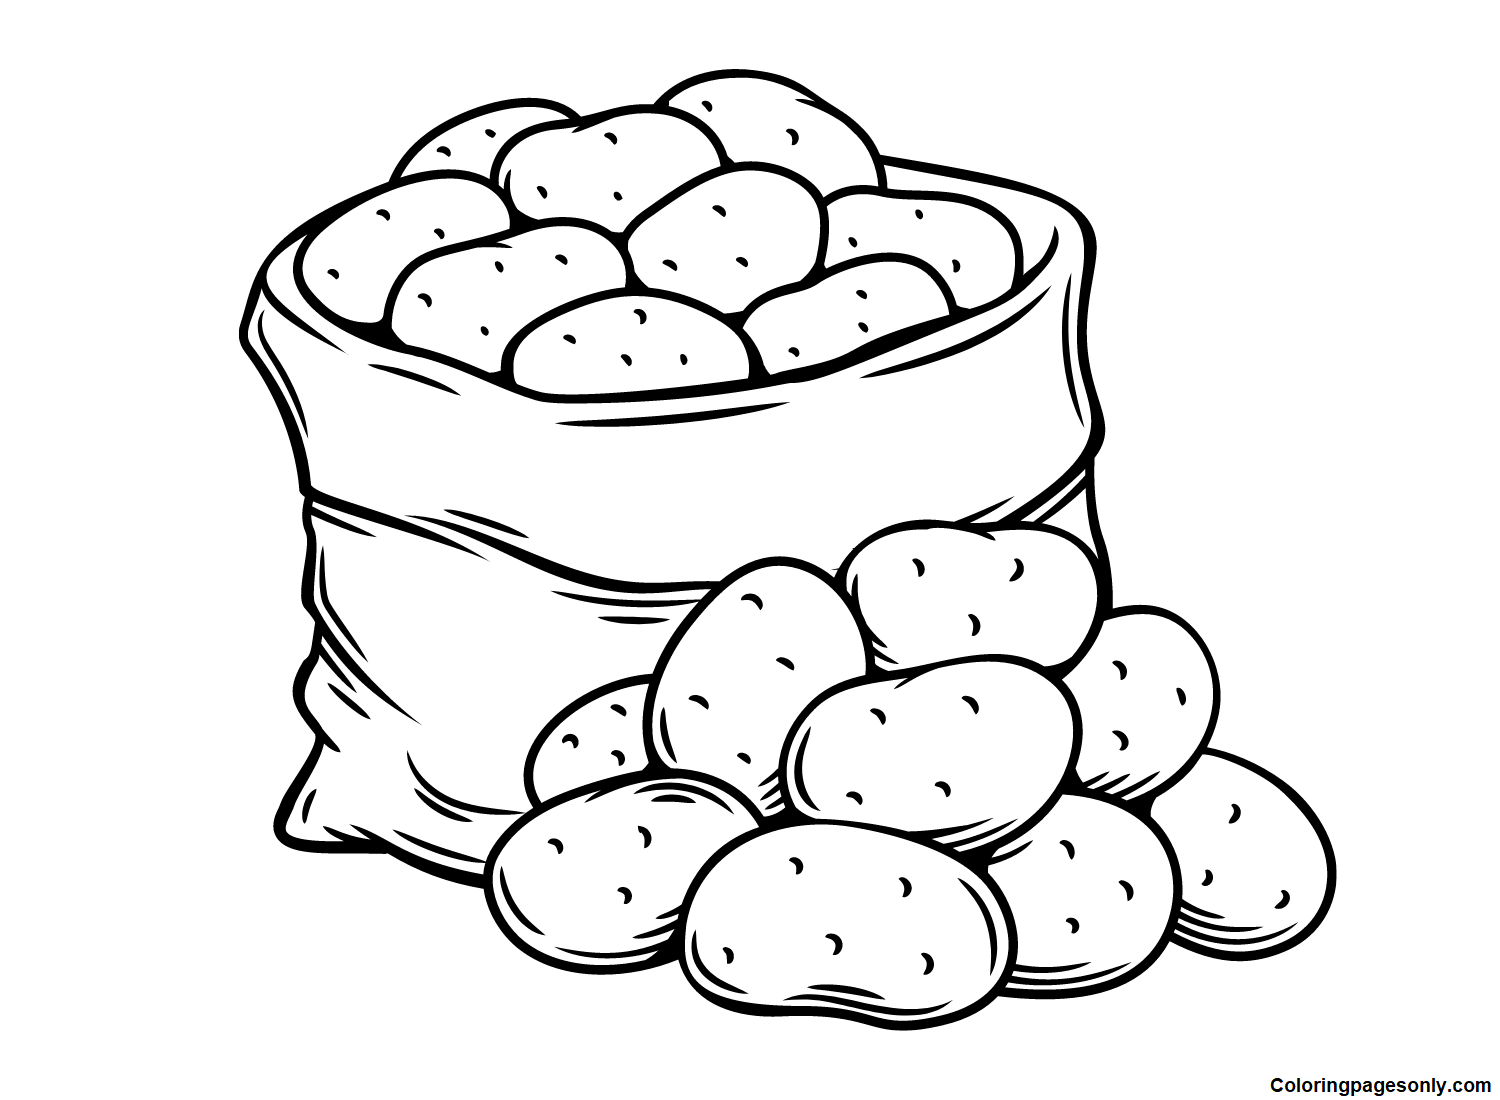 Sack of Potatoes Images Coloring Page